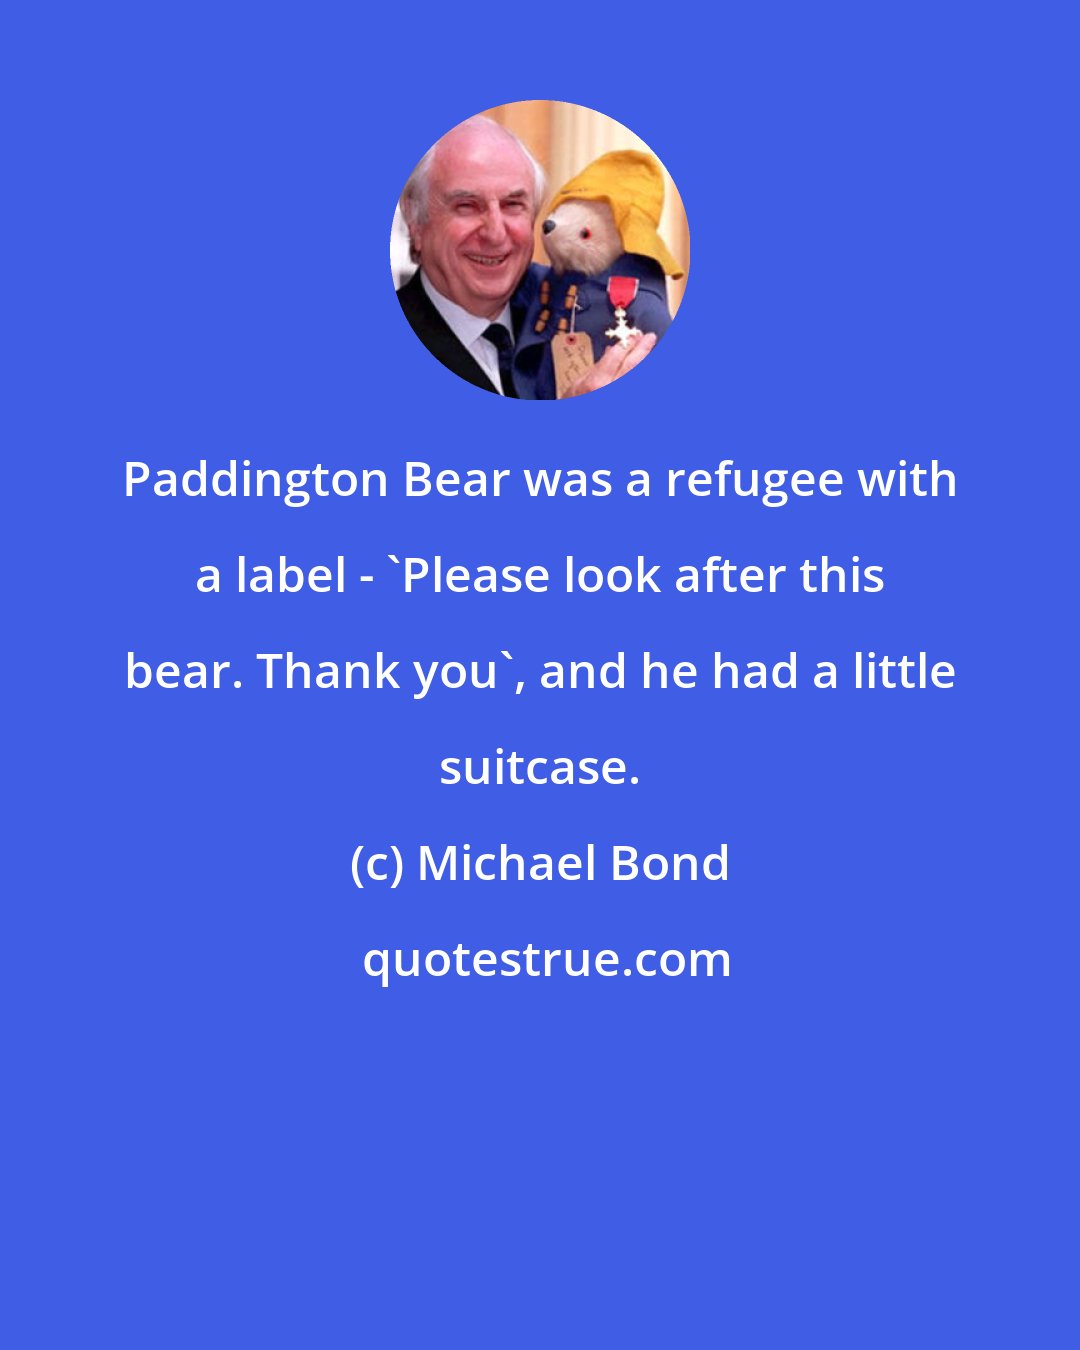 Michael Bond: Paddington Bear was a refugee with a label - 'Please look after this bear. Thank you', and he had a little suitcase.